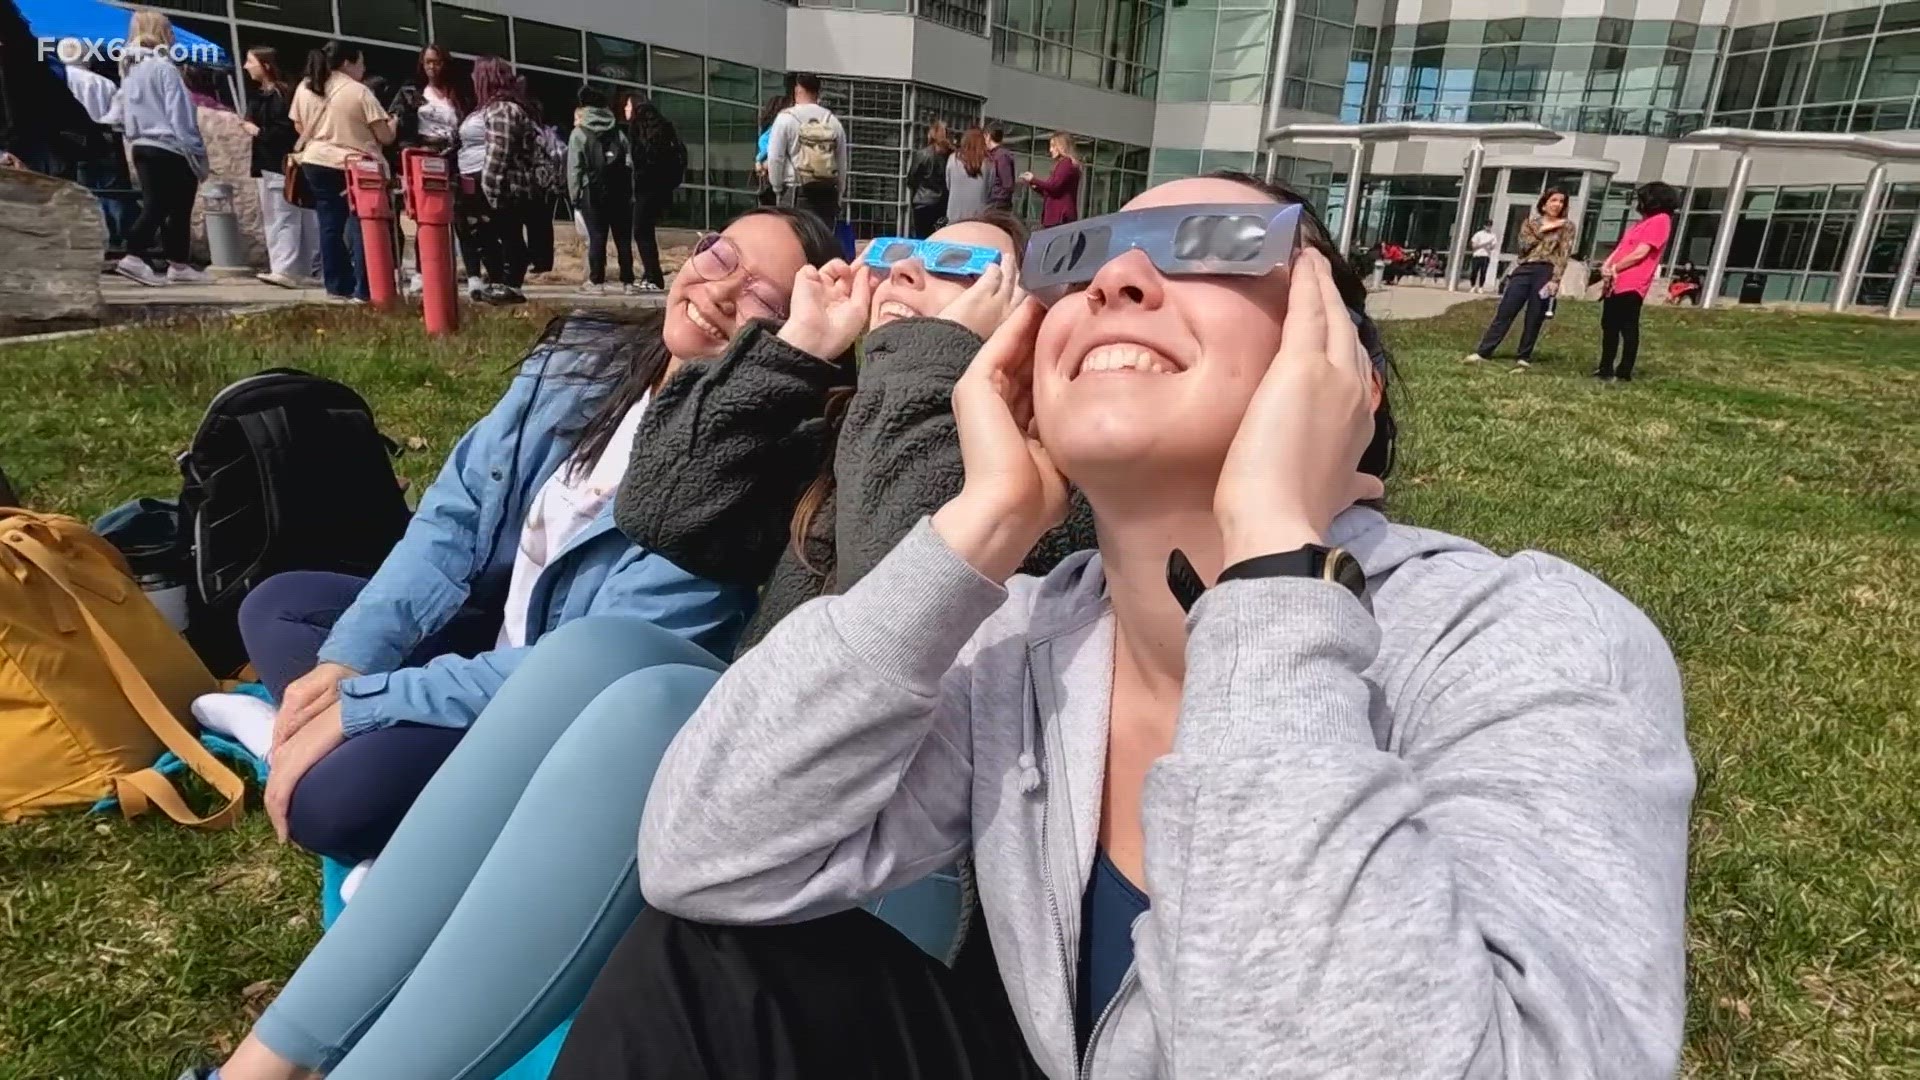 FOX61's Julia LeBlanc joined in on the fun at SCSU, where educators used the solar eclipse as a learning opportunity and to get everyone together.